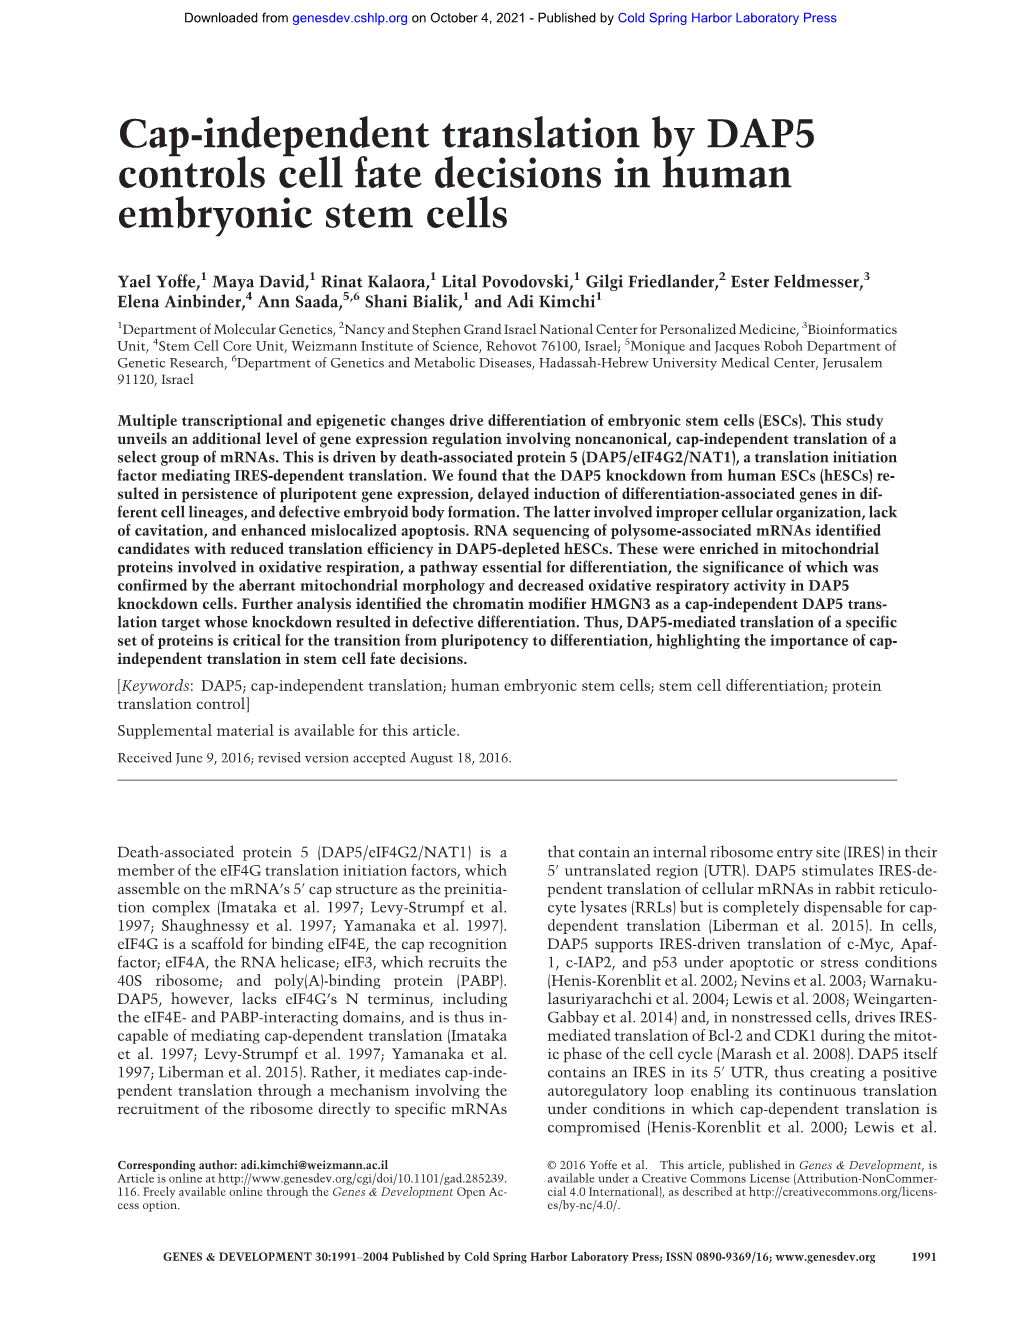 Cap-Independent Translation by DAP5 Controls Cell Fate Decisions in Human Embryonic Stem Cells